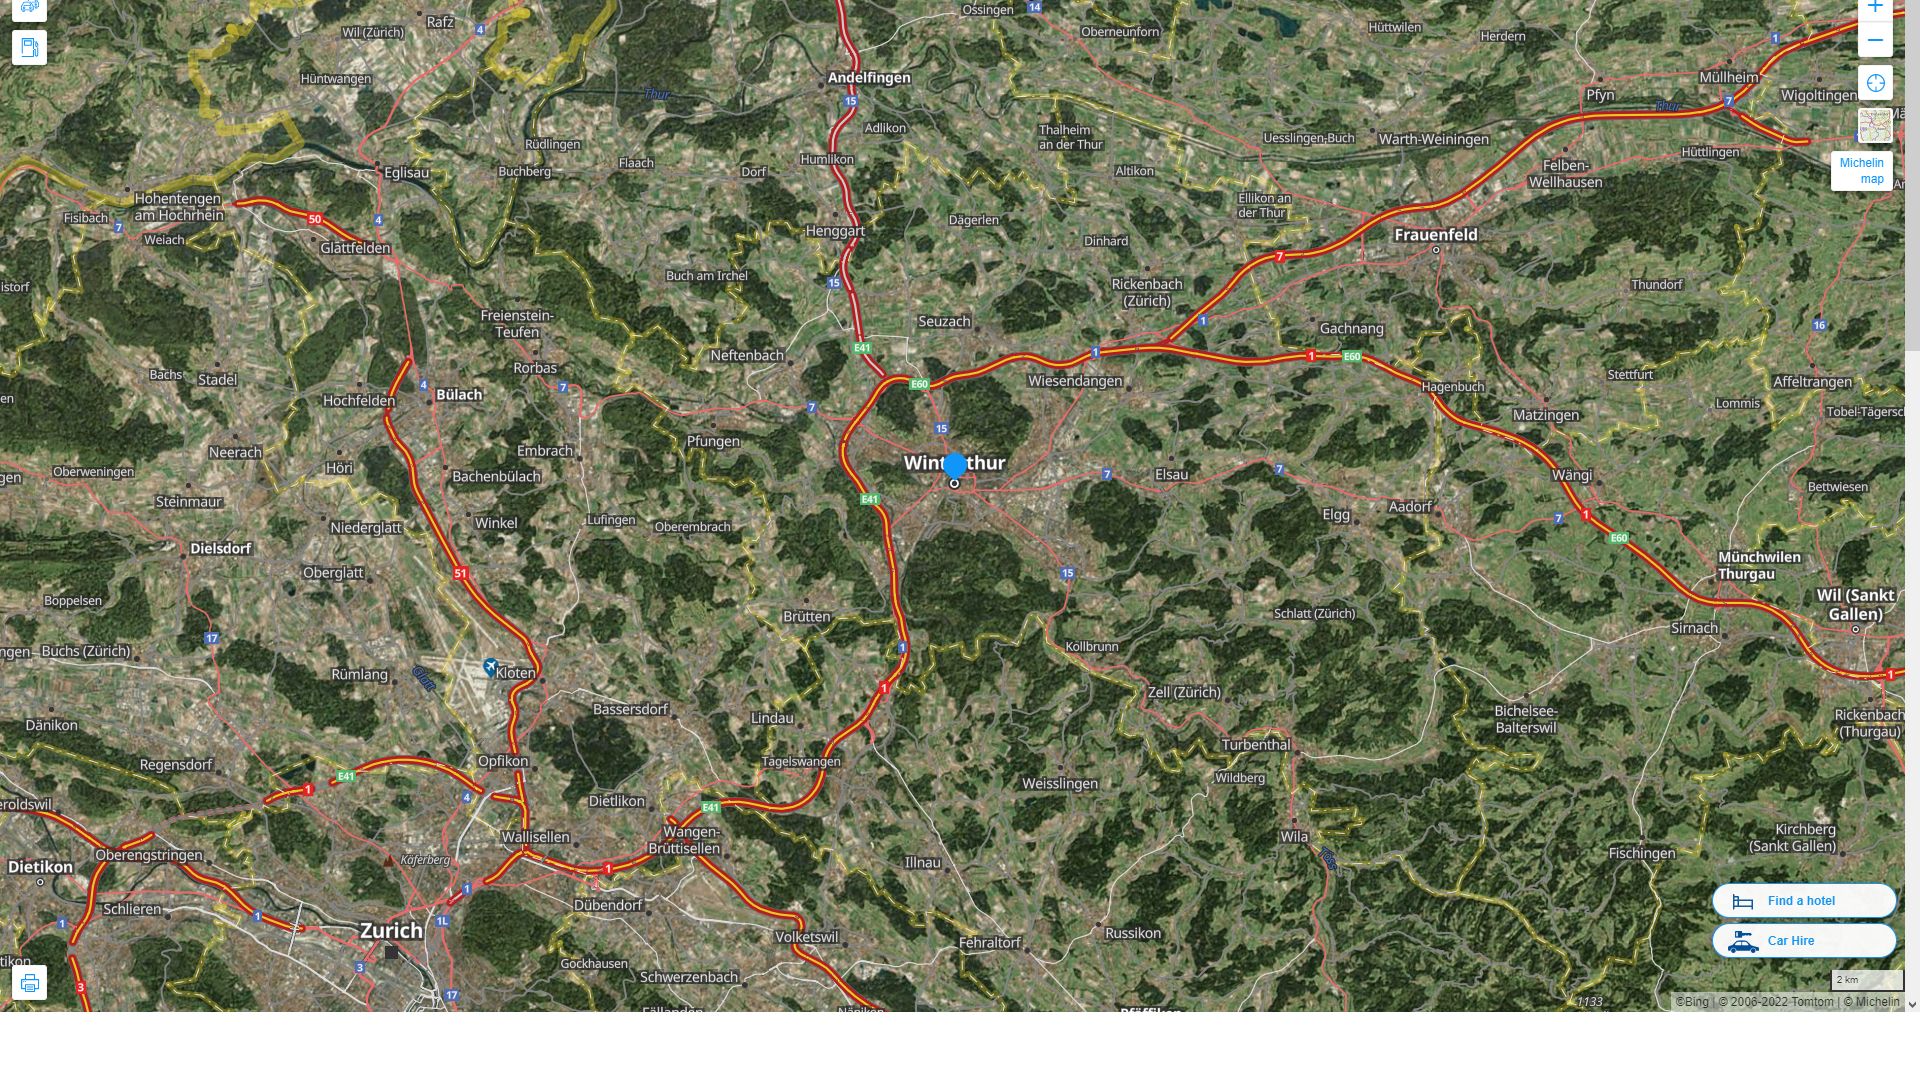 Winterthur Highway and Road Map with Satellite View